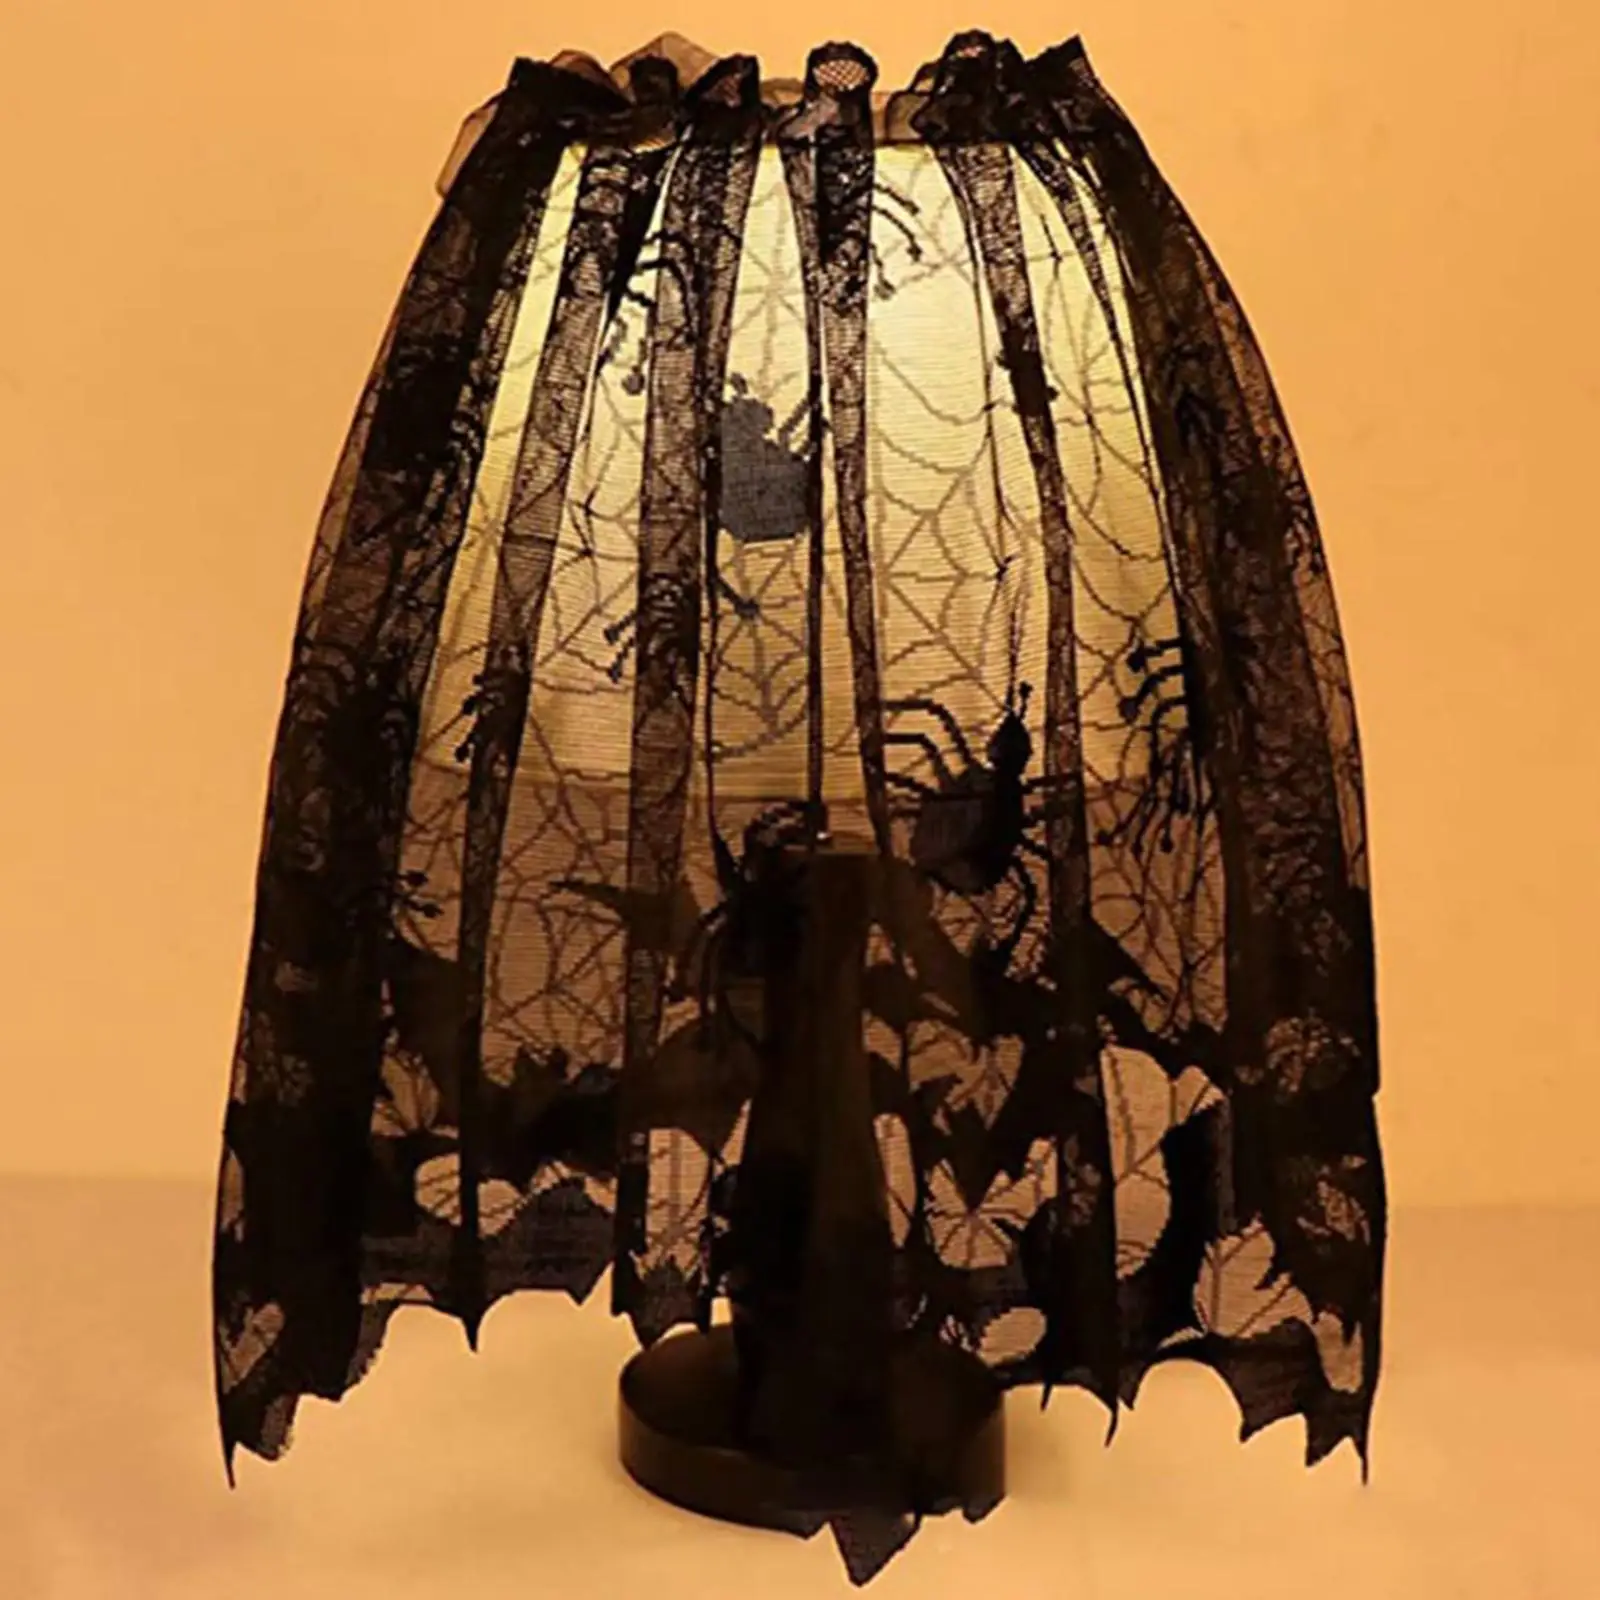 Lampshades Cover Spider Spiderweb Lampshades Light Cover Scarf Halloween Lamp Shade for Party Wall Fireplace Decor Supplies